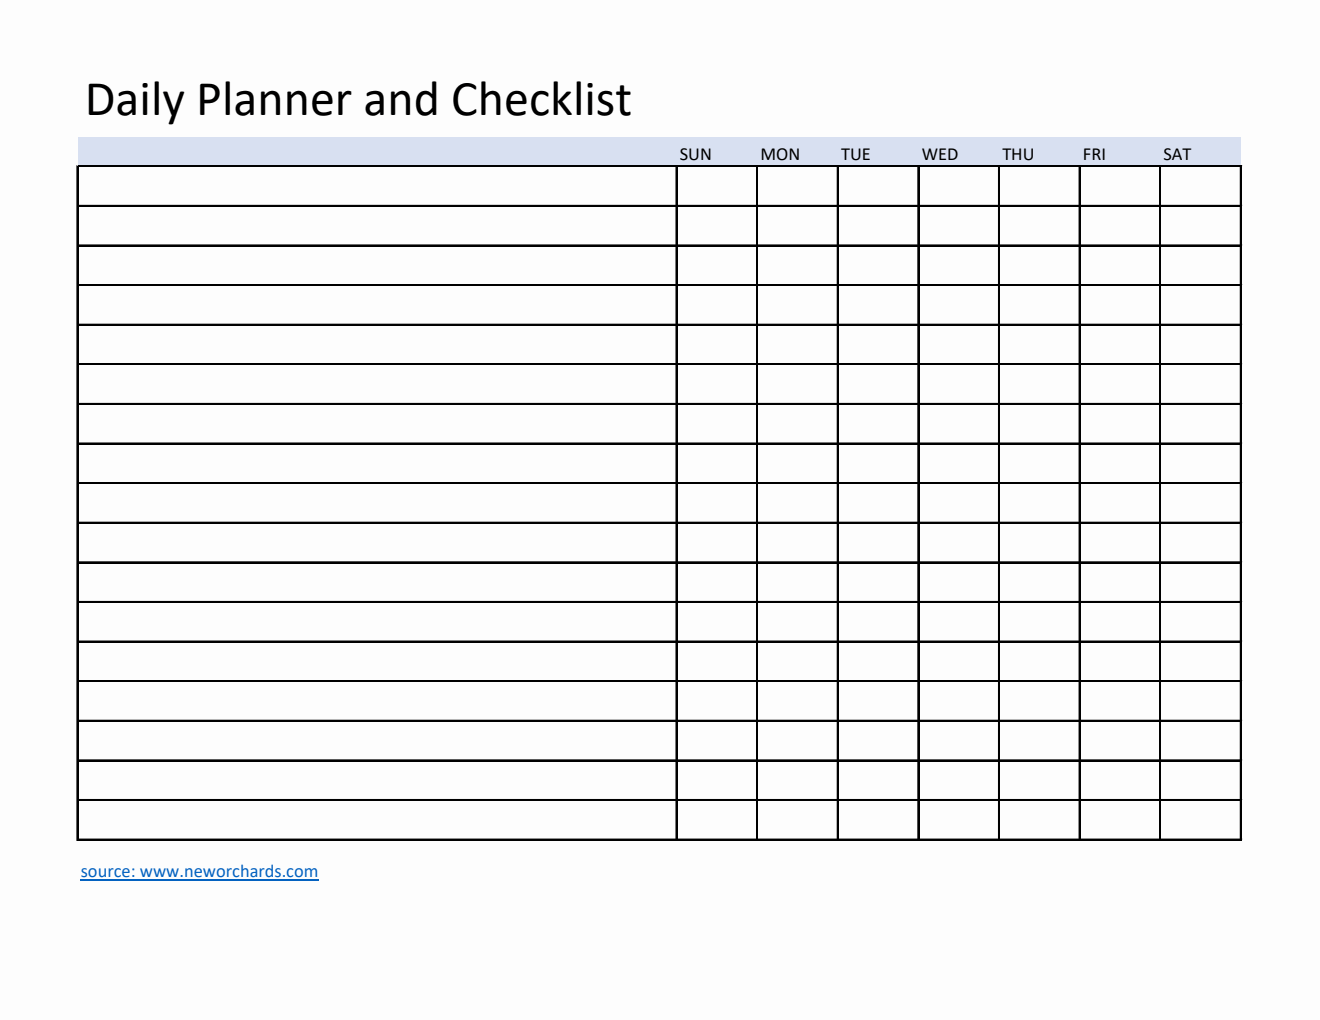 Daily Planner and Checklist Template in Excel (Customizable)